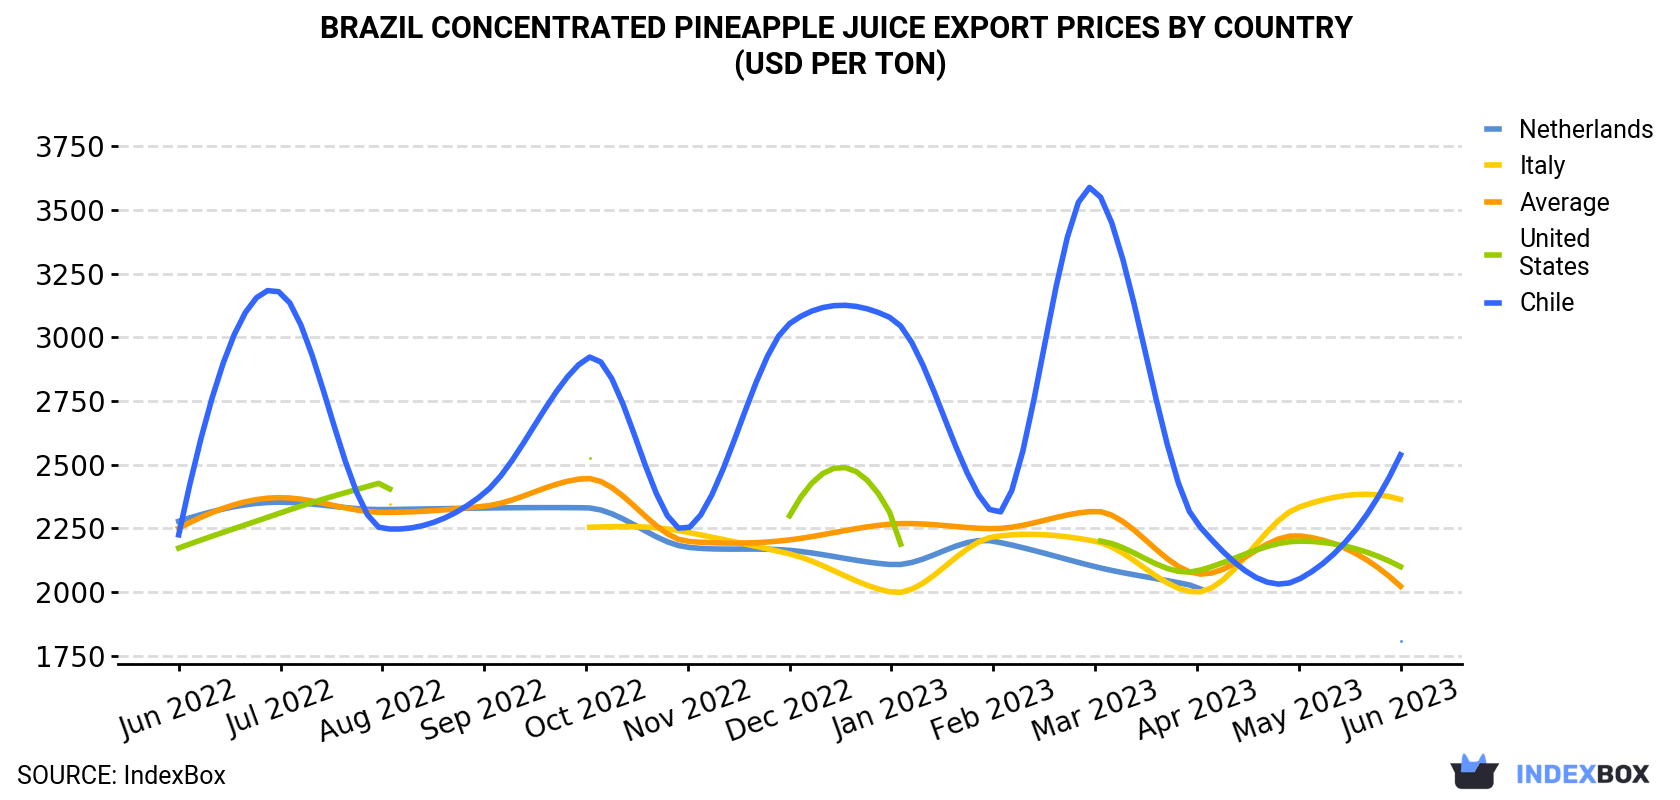 Brazil Concentrated Pineapple Juice Export Prices By Country (USD Per Ton)